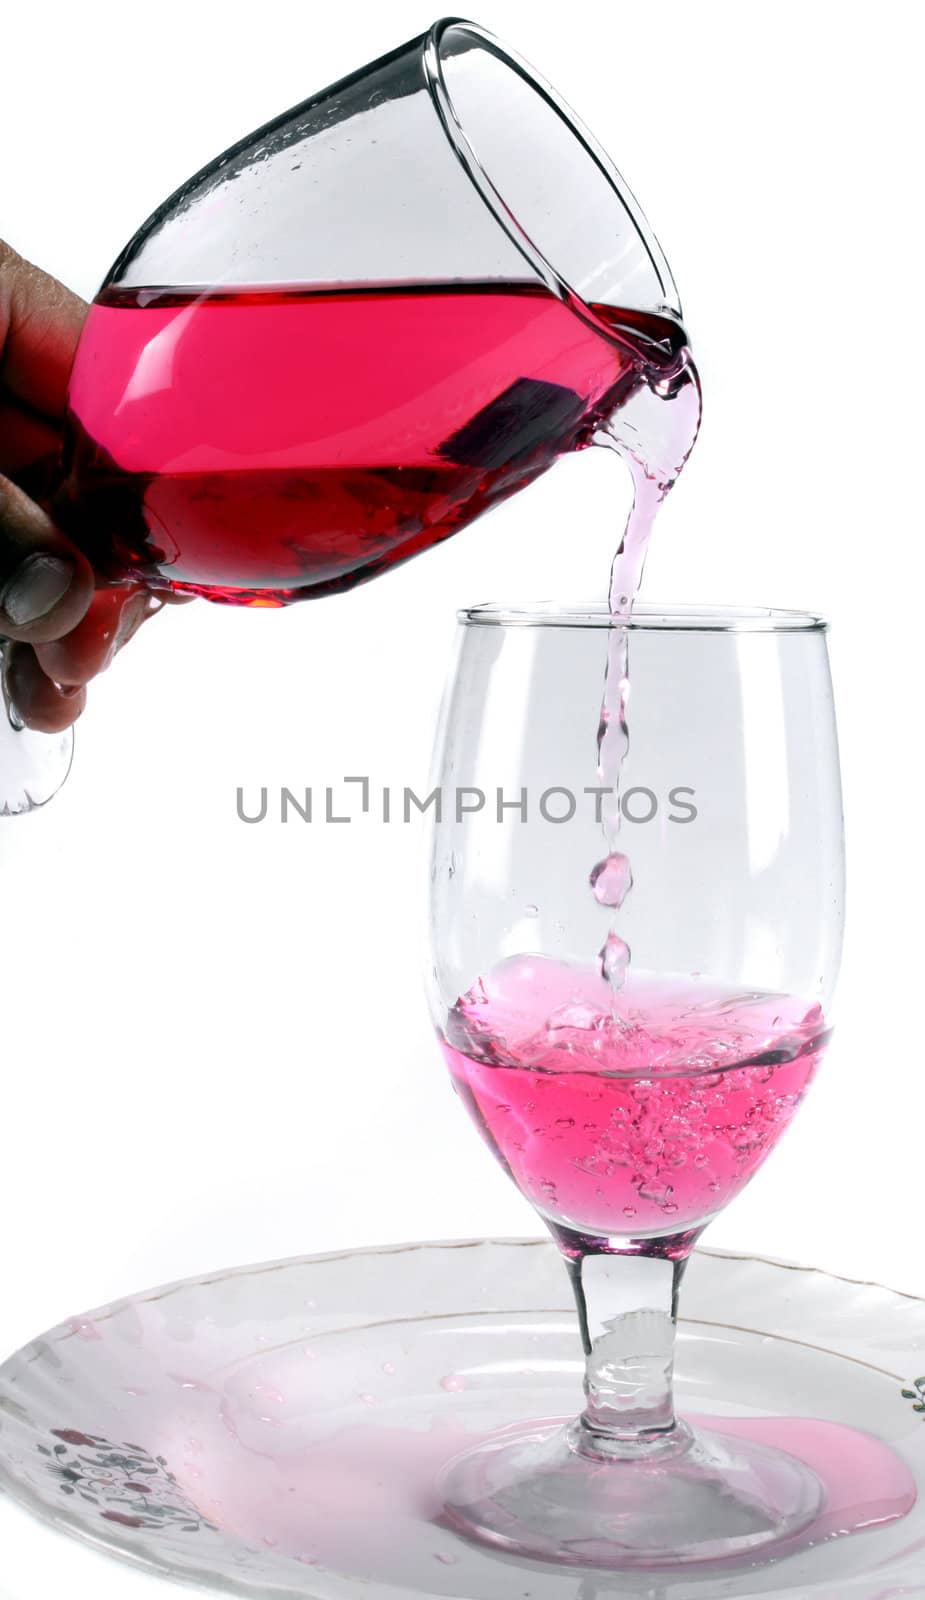 A concentrated red flavor being poured in a glass to make cocktail.